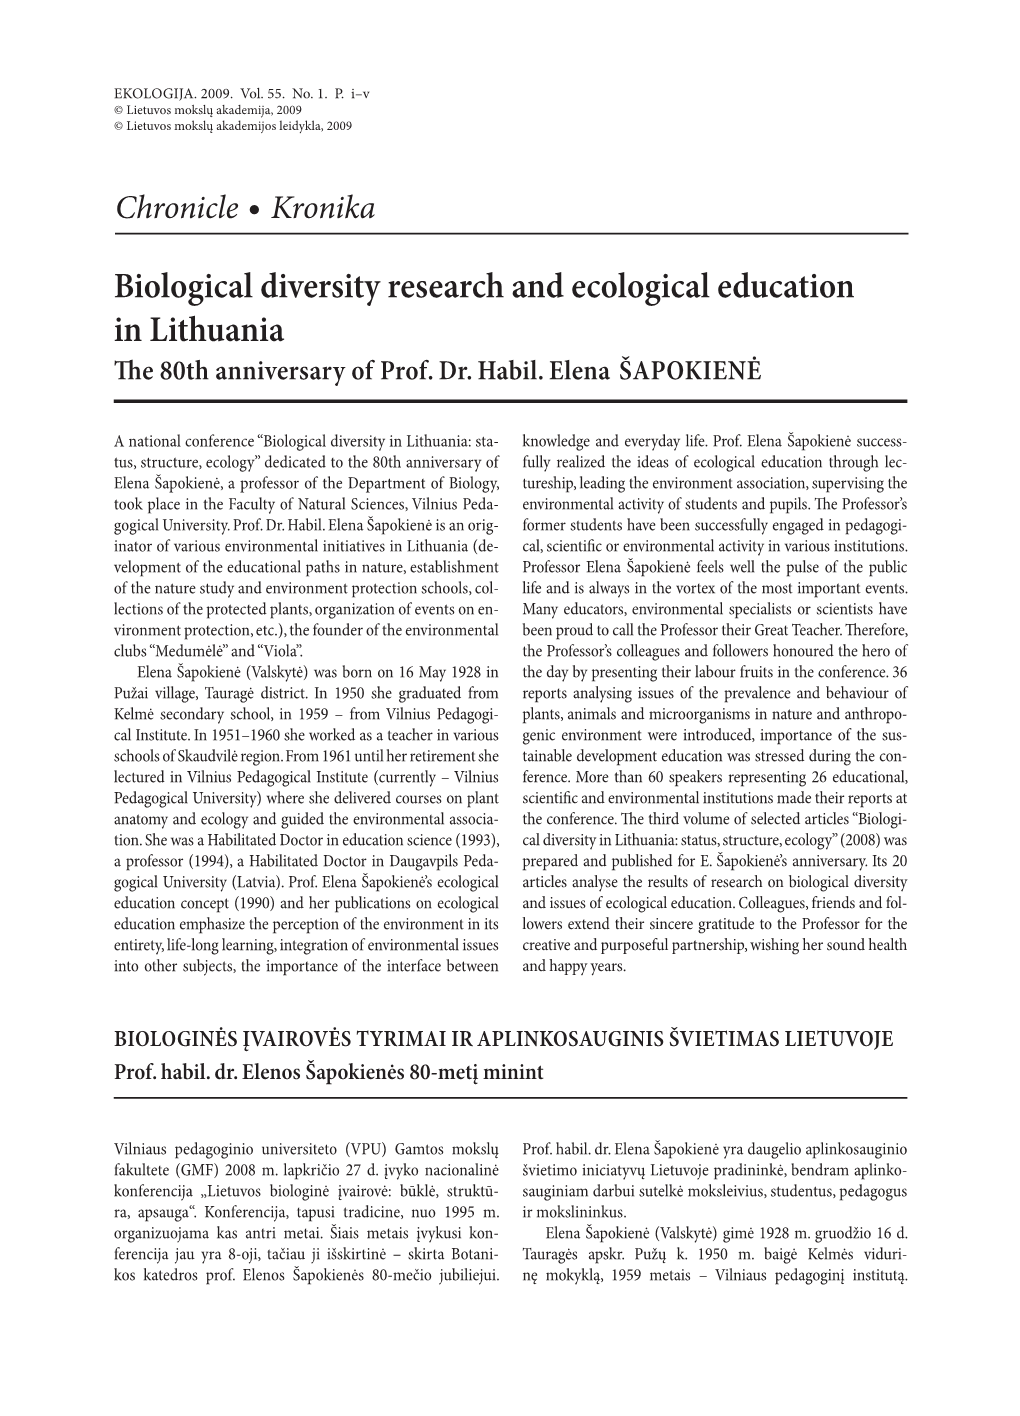 Biological Diversity Research and Ecological Education in Lithuania the 80Th Anniversary of Prof